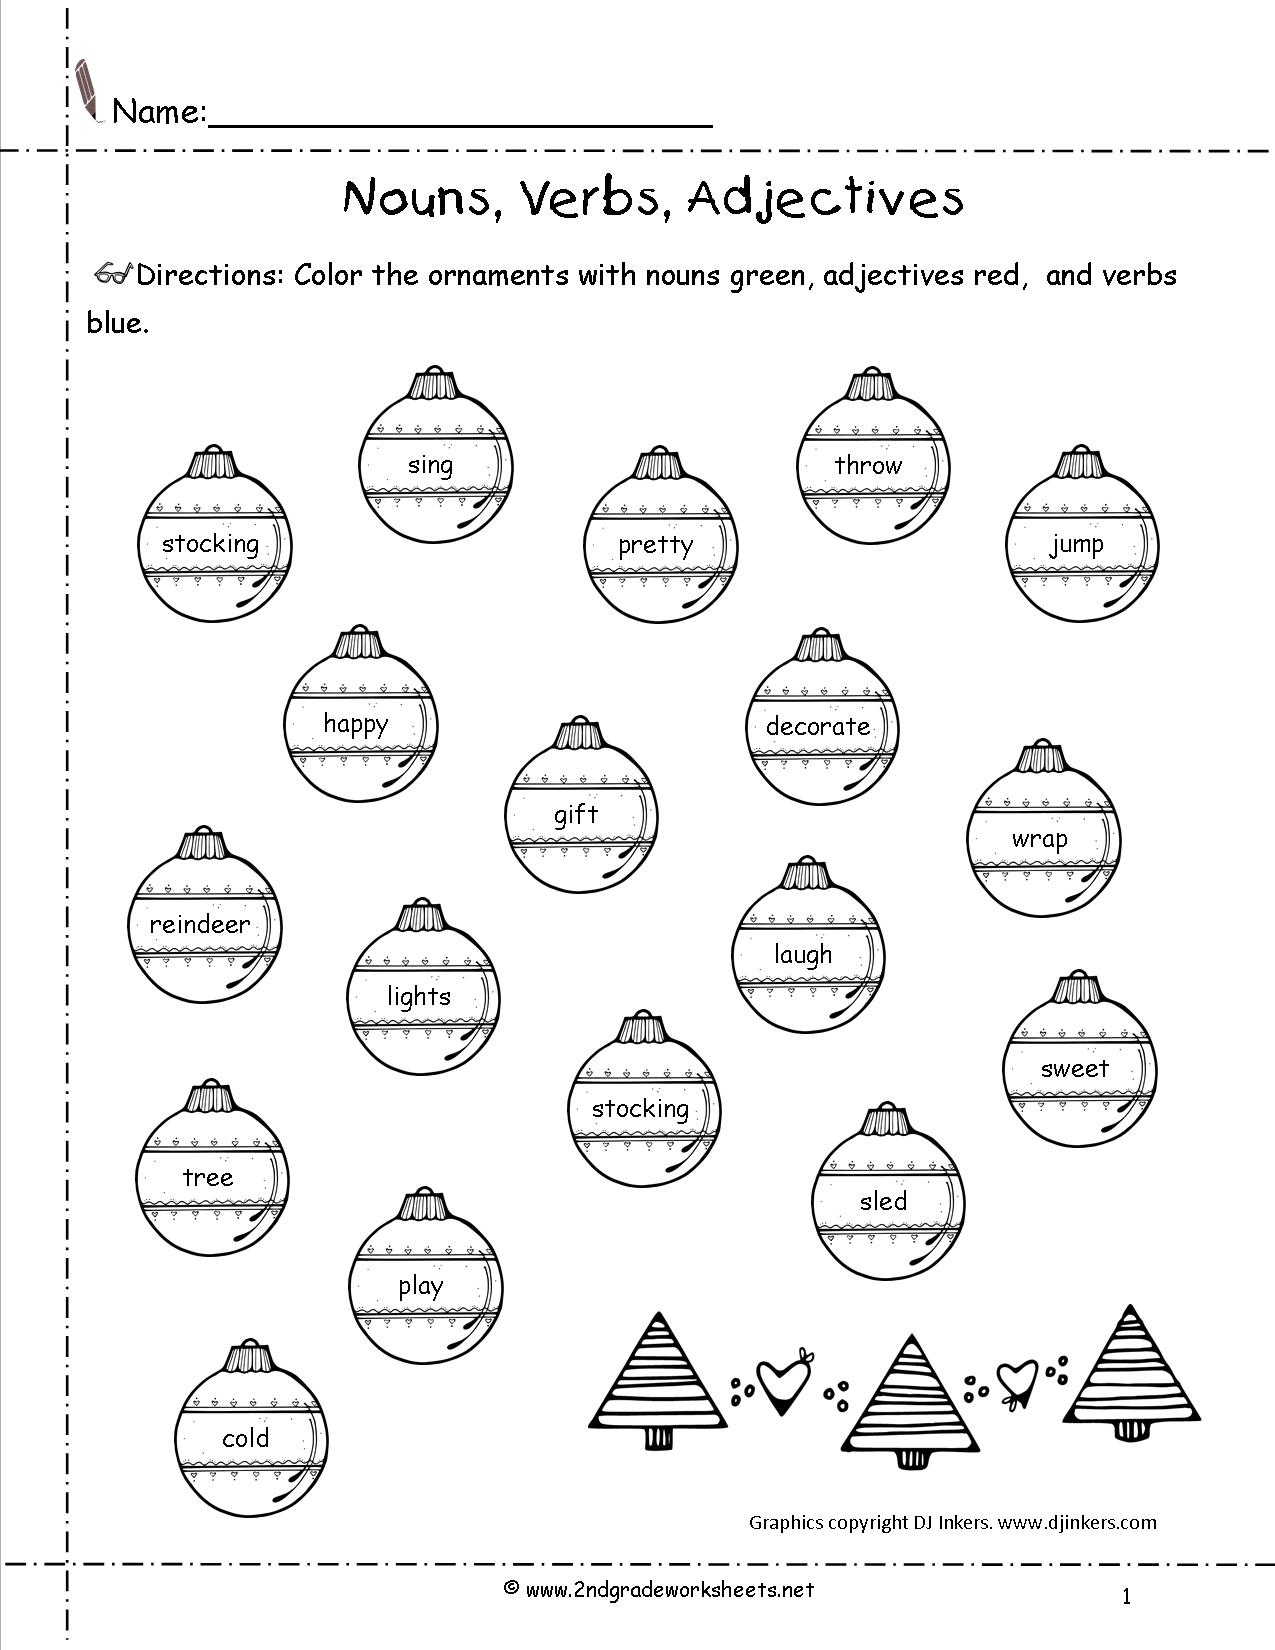 Christmas Worksheets And Printouts - Free Printable Christmas Worksheets